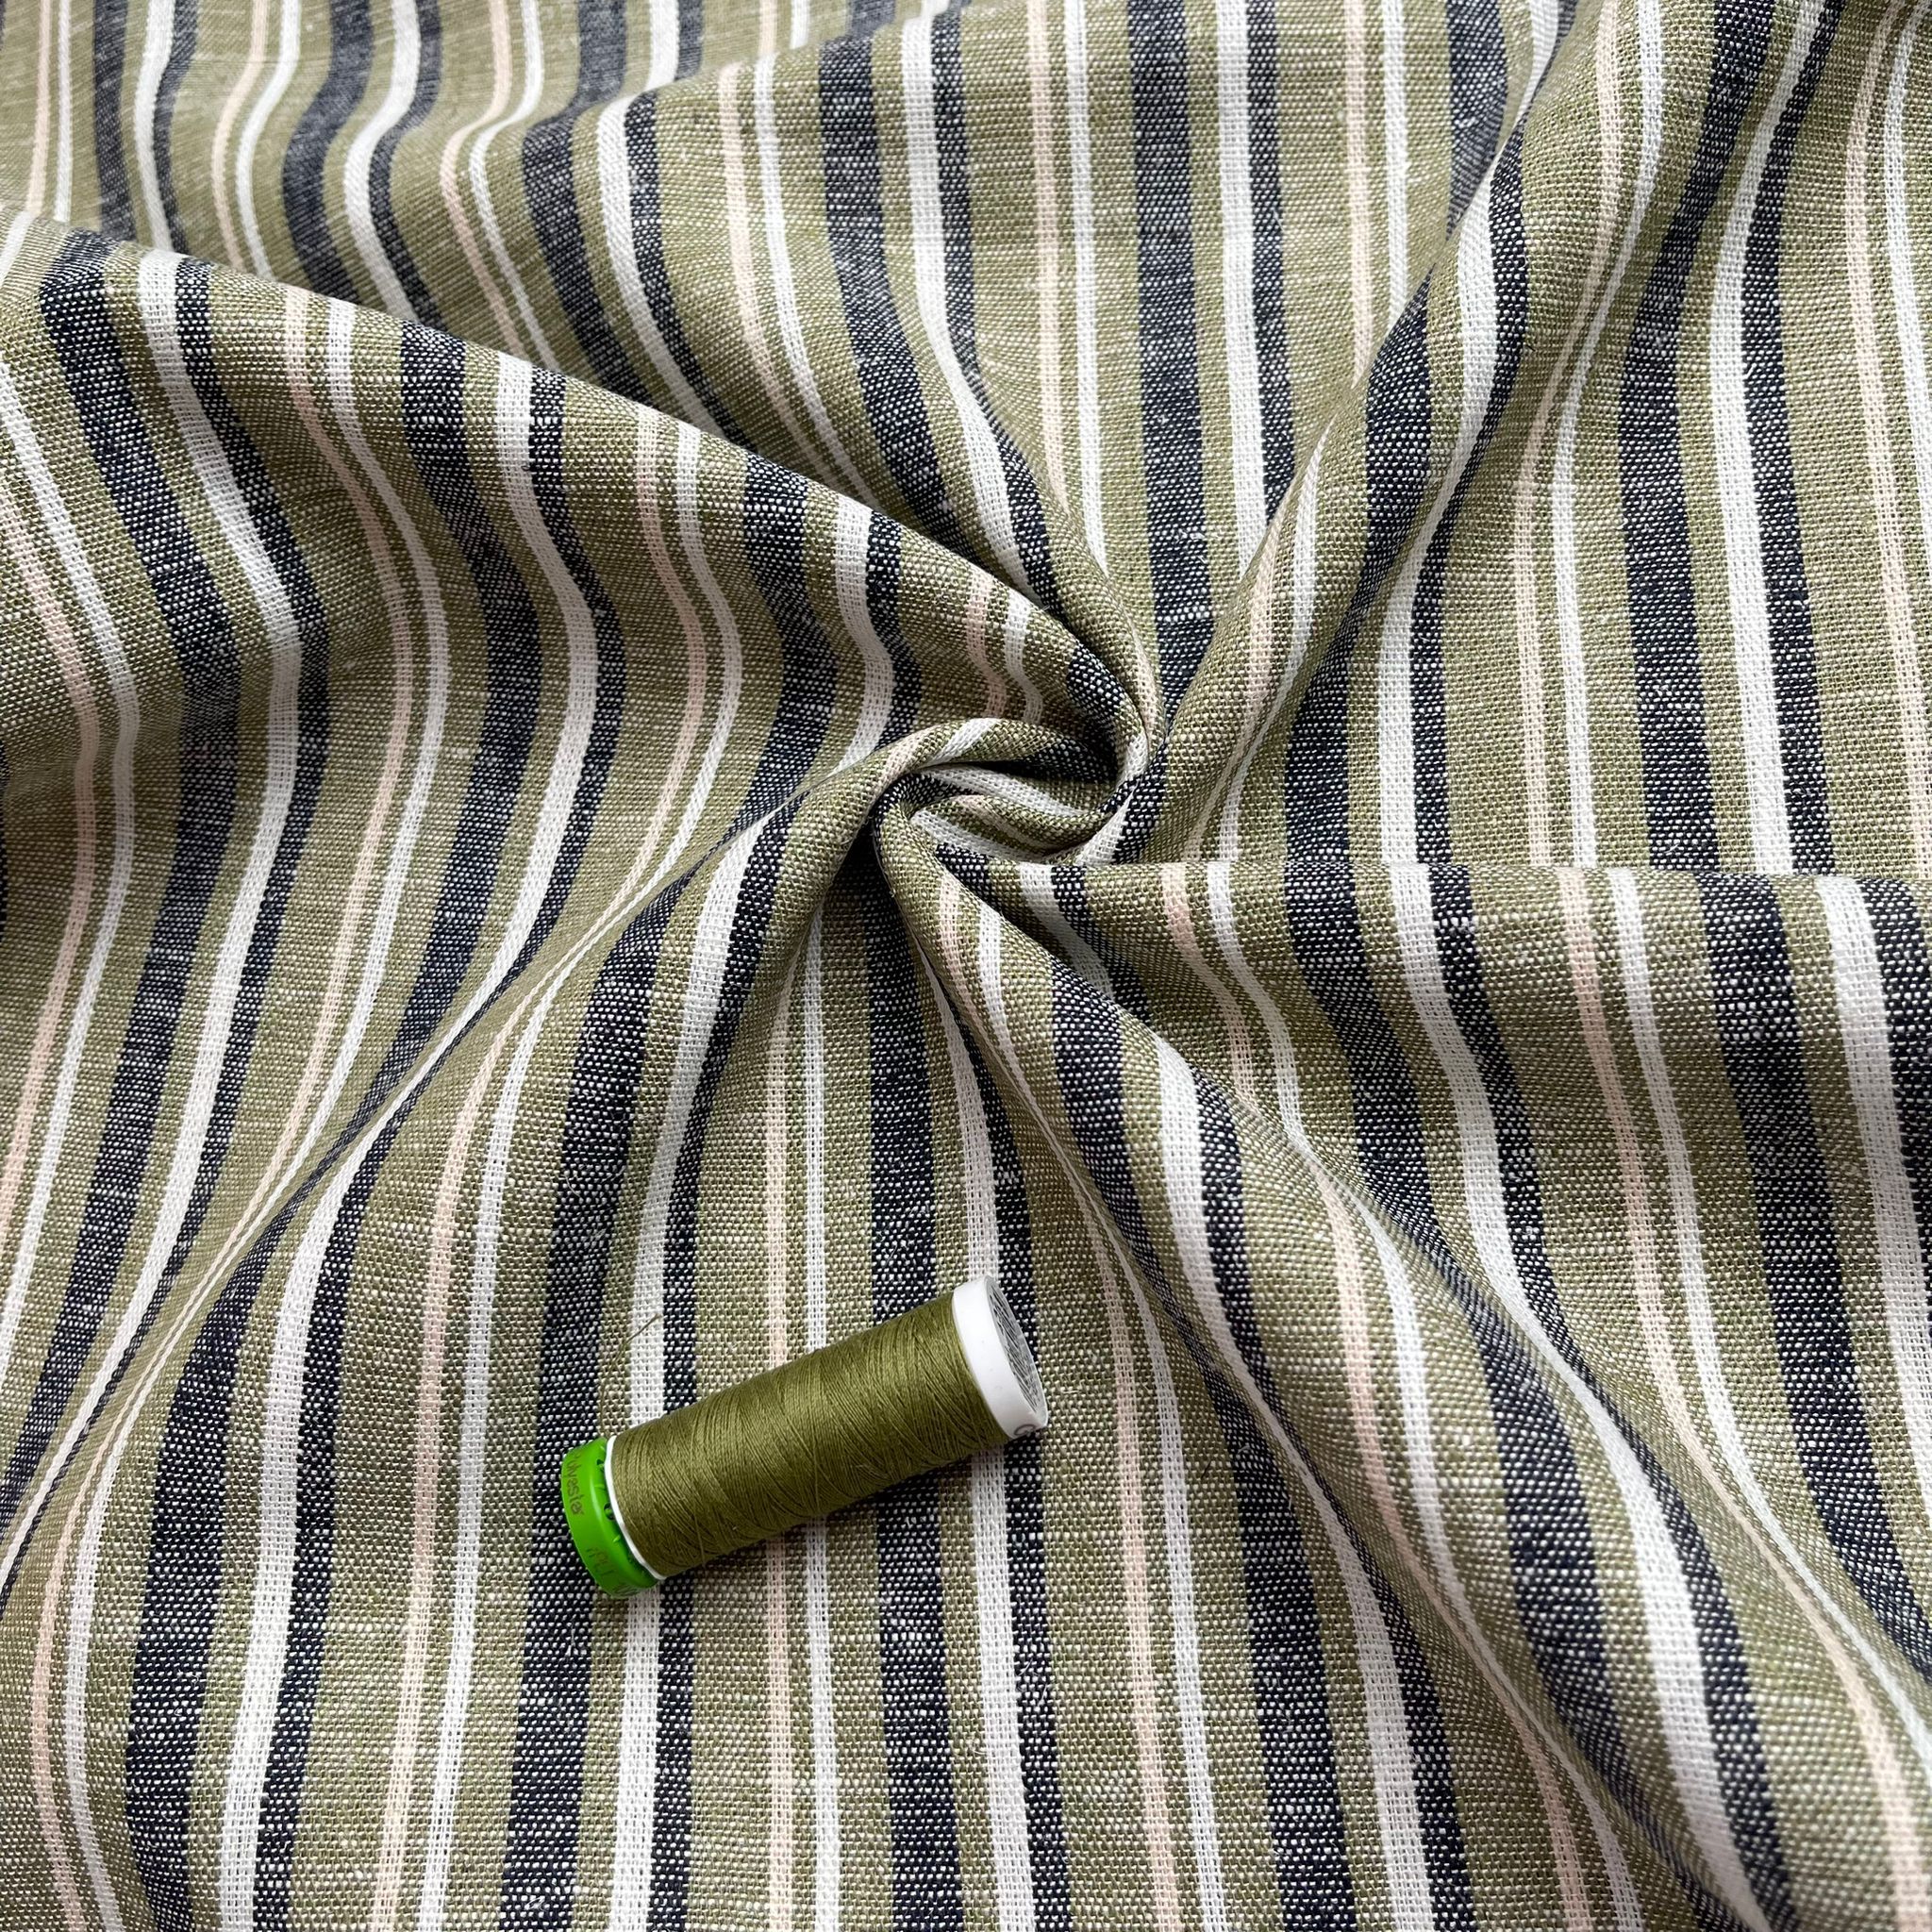 Yarn Dyed Striped LInen Viscose Blend Fabric in Olive & Navy